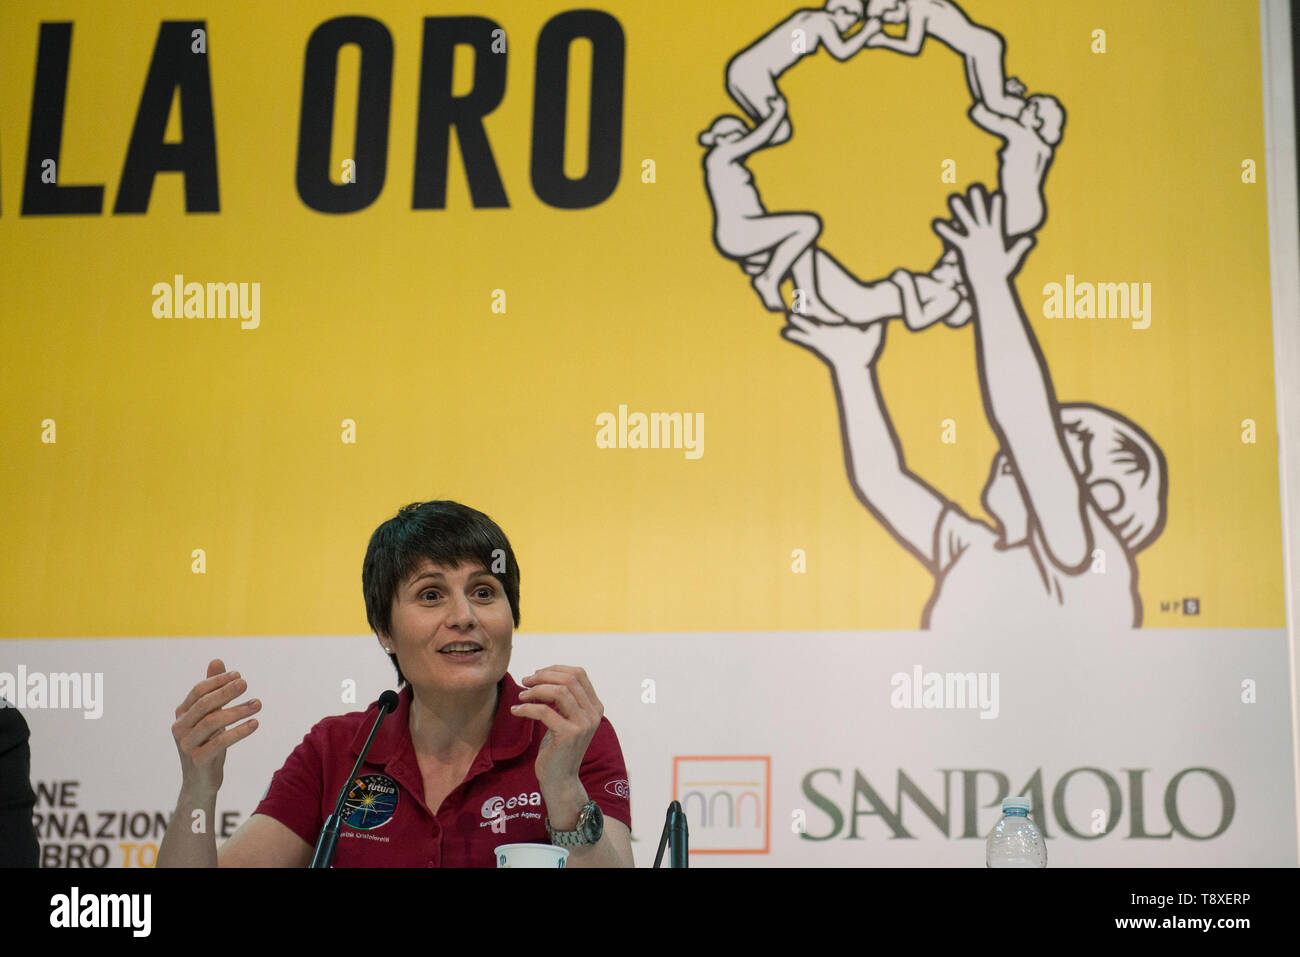 Turin, Piedmont, Italy. 9th May, 2019. Turin, Italy-May 9, 2019: Samantha Cristoforetti during the Inauguration of the Turin International Book Fair Credit: Stefano Guidi/ZUMA Wire/Alamy Live News Stock Photo